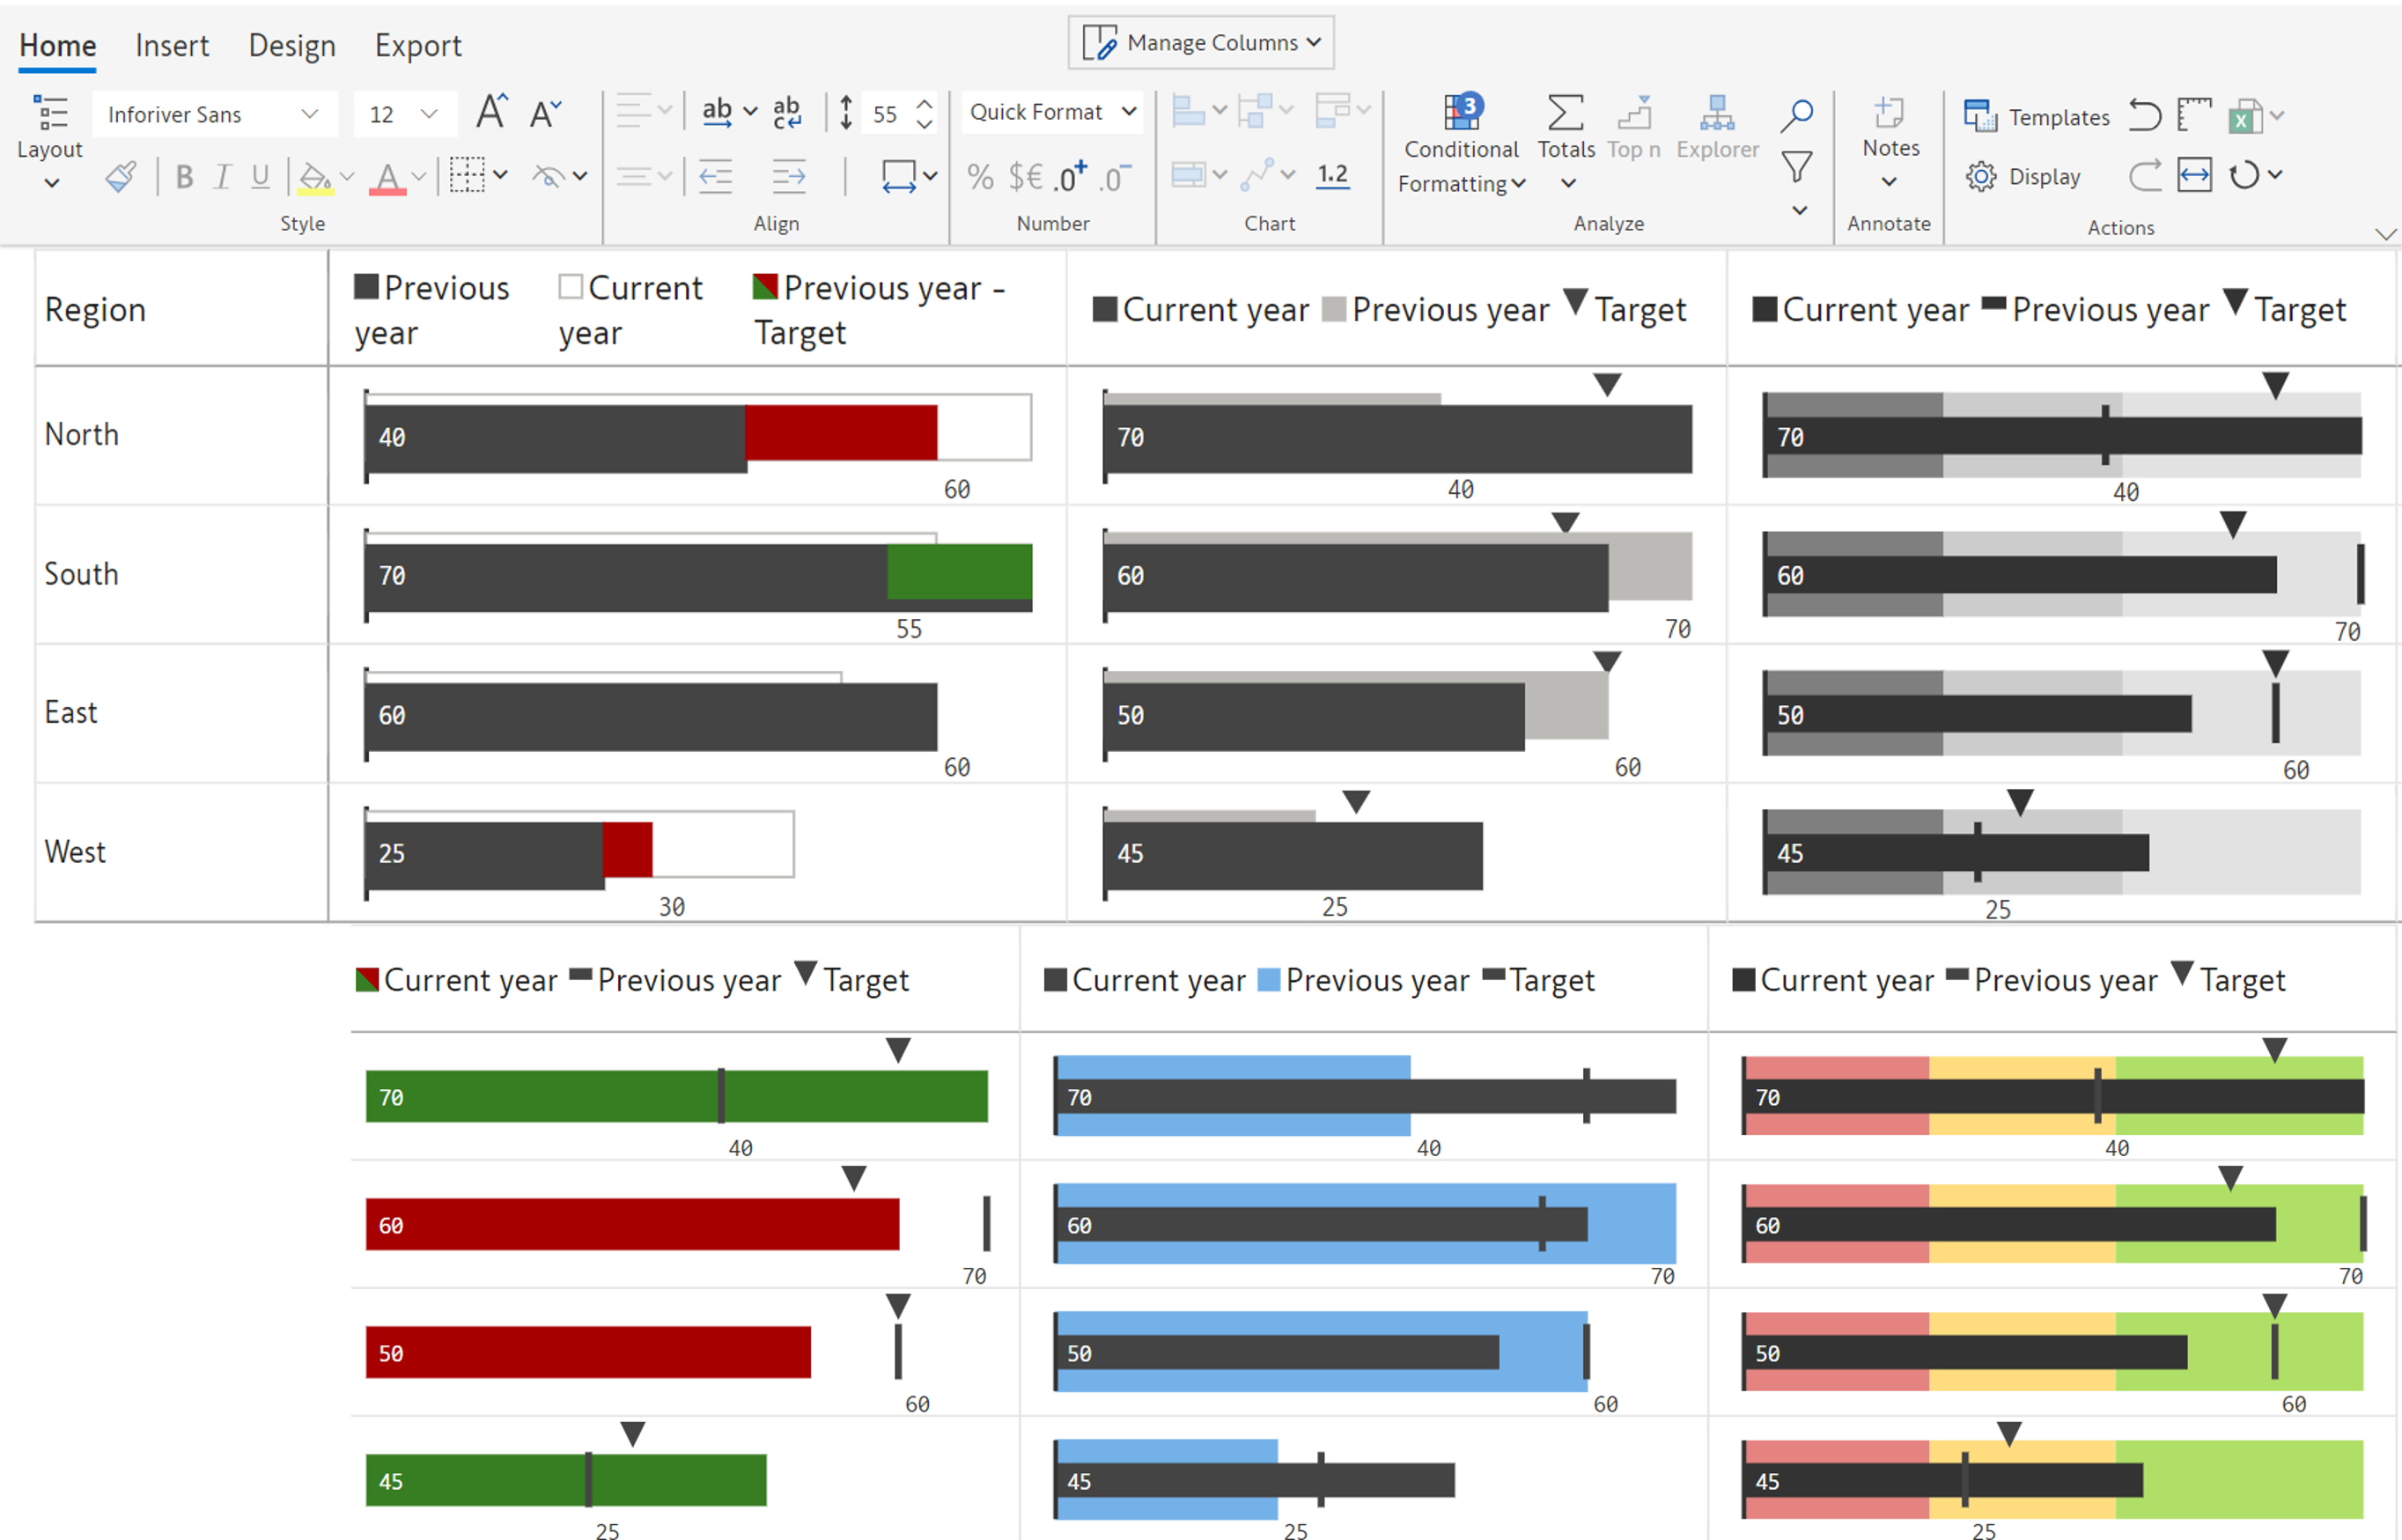 bullet-charts-in-power-bi-with-Inforiver-extension